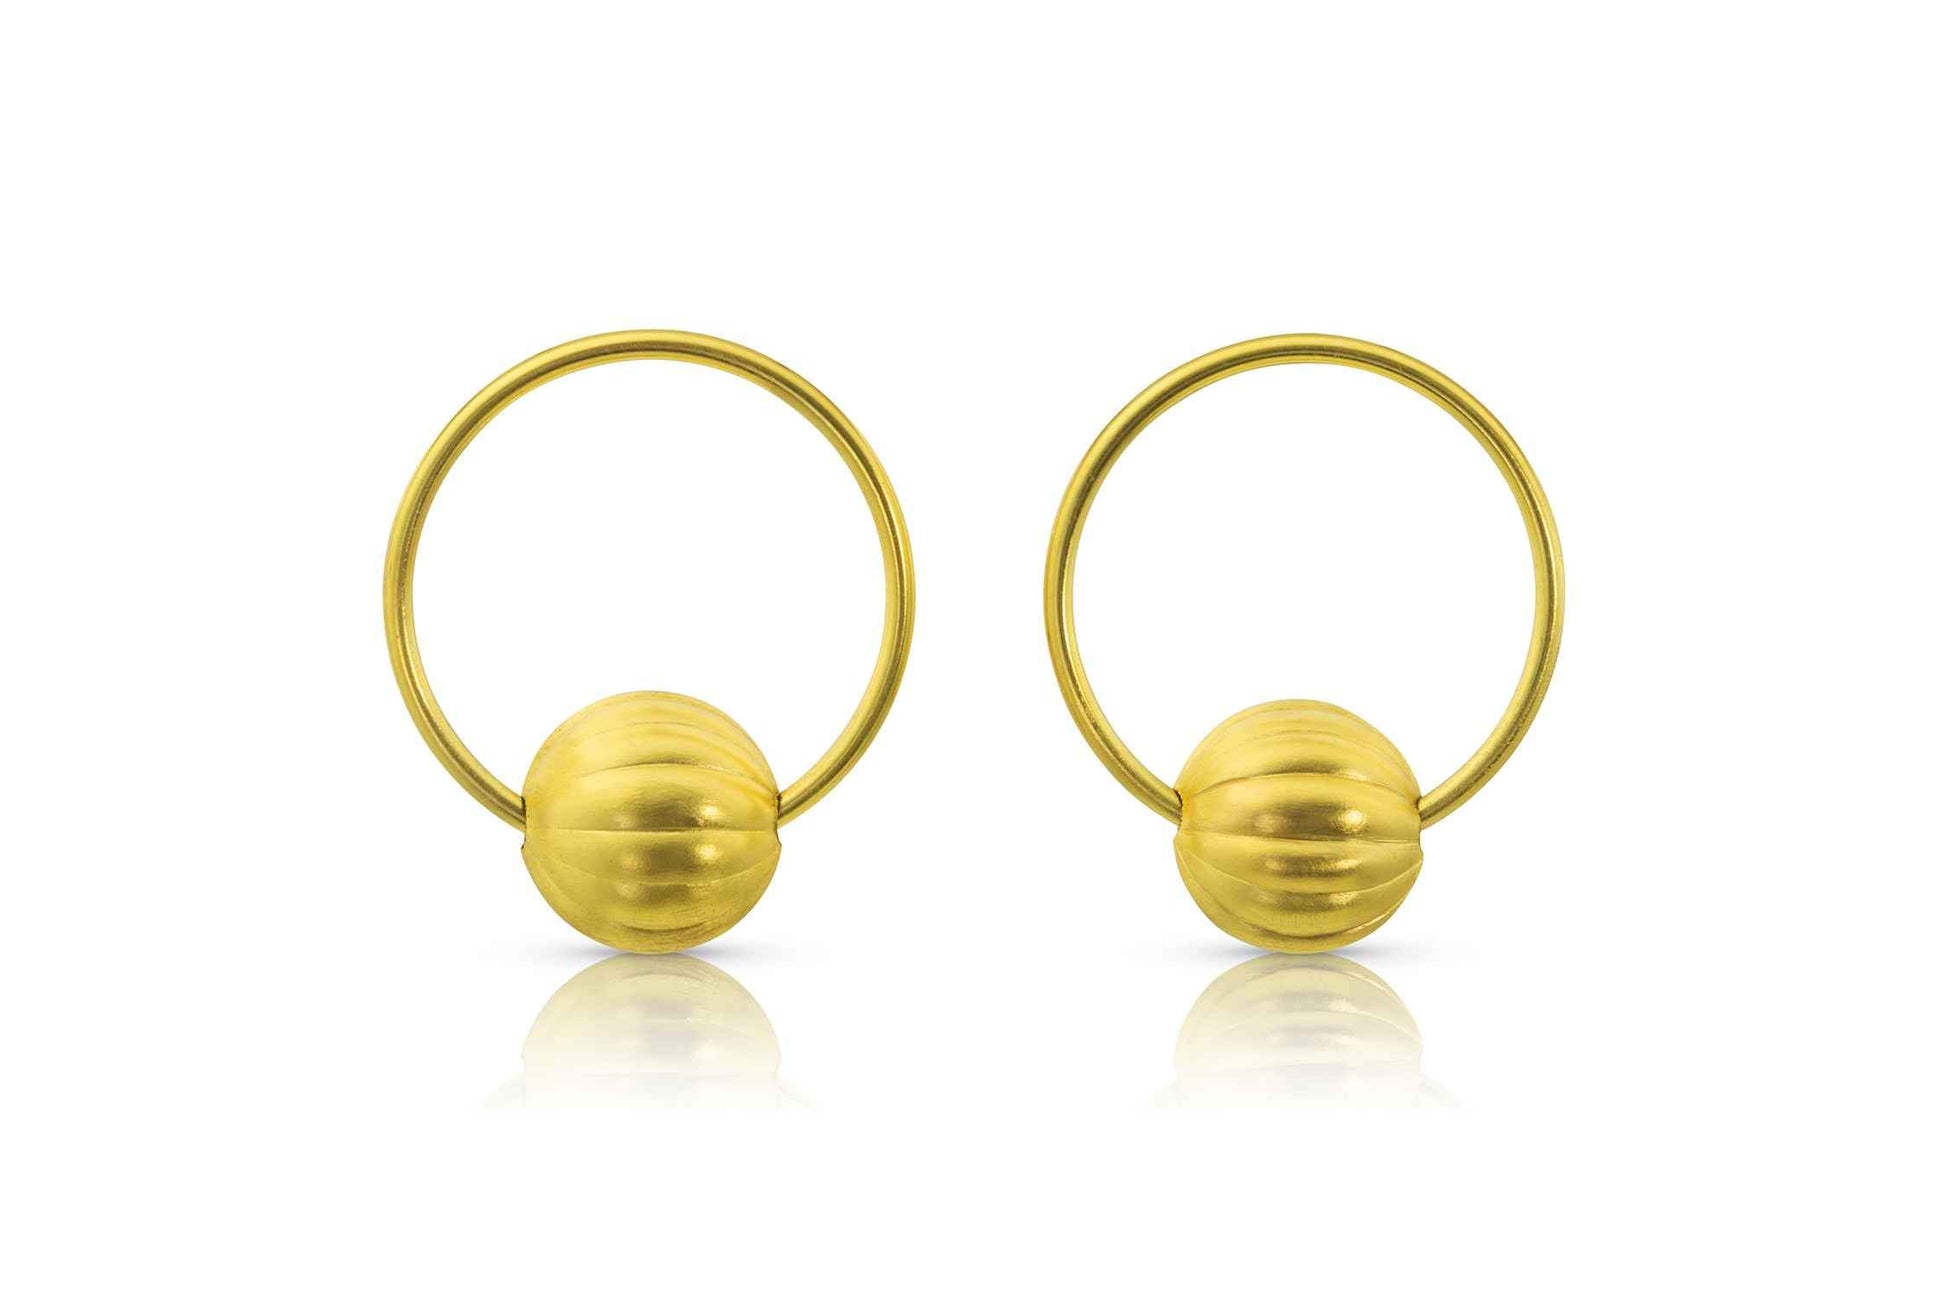 22k Gold hoop earrings with a gold ball at the bottom